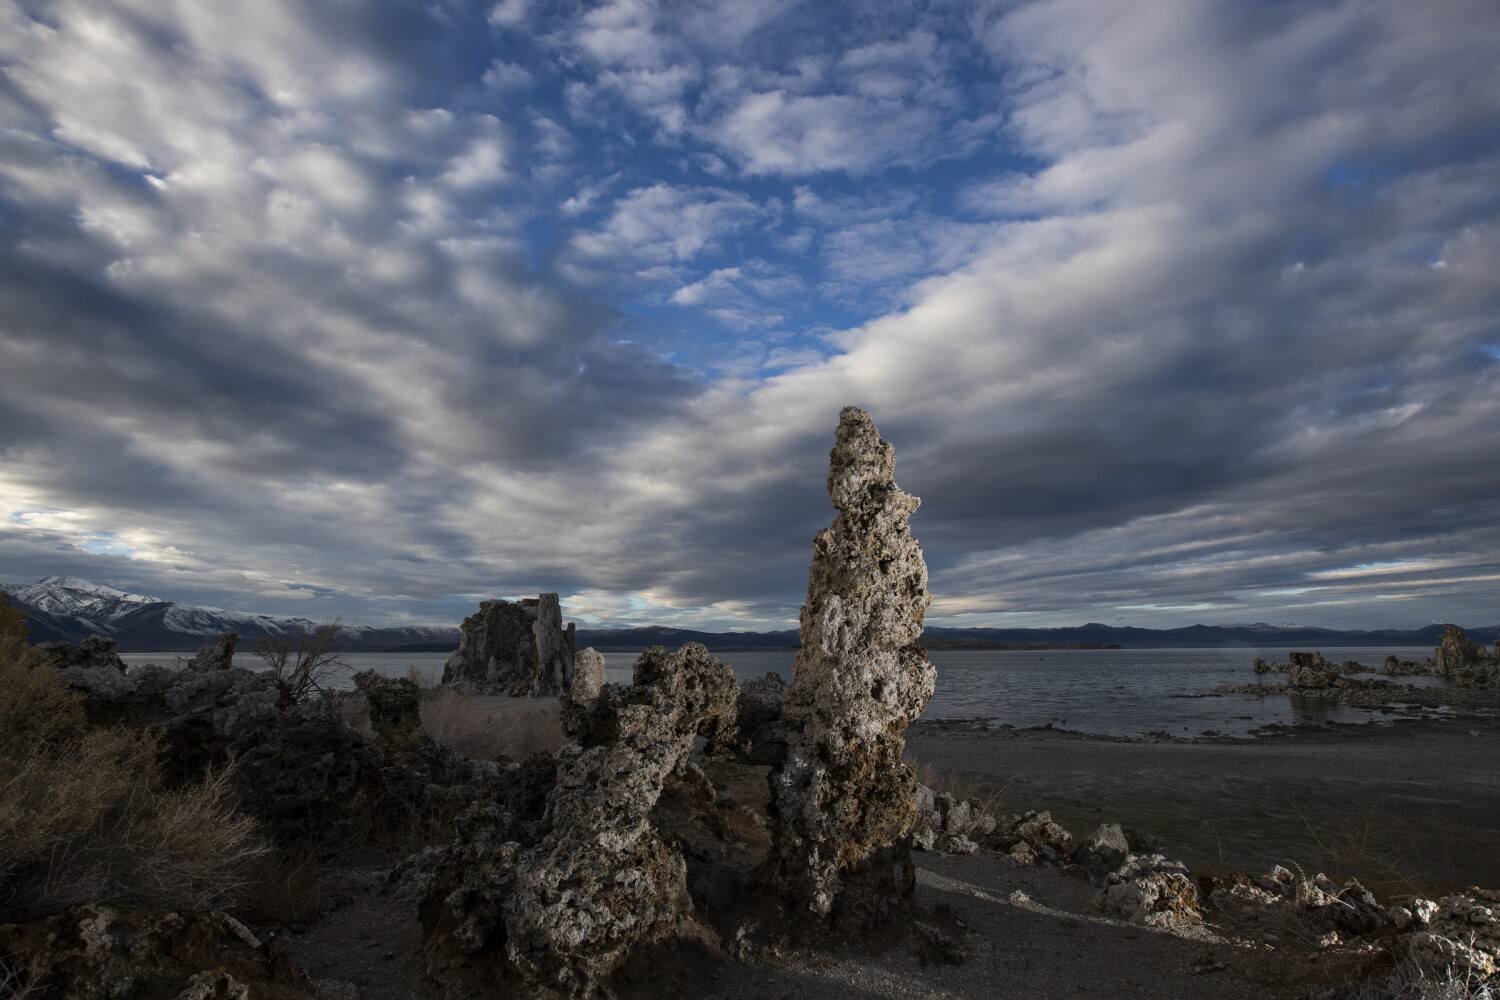 Vexed by dust pollution, officials around Mono Lake call on Los Angeles to cease water diversions